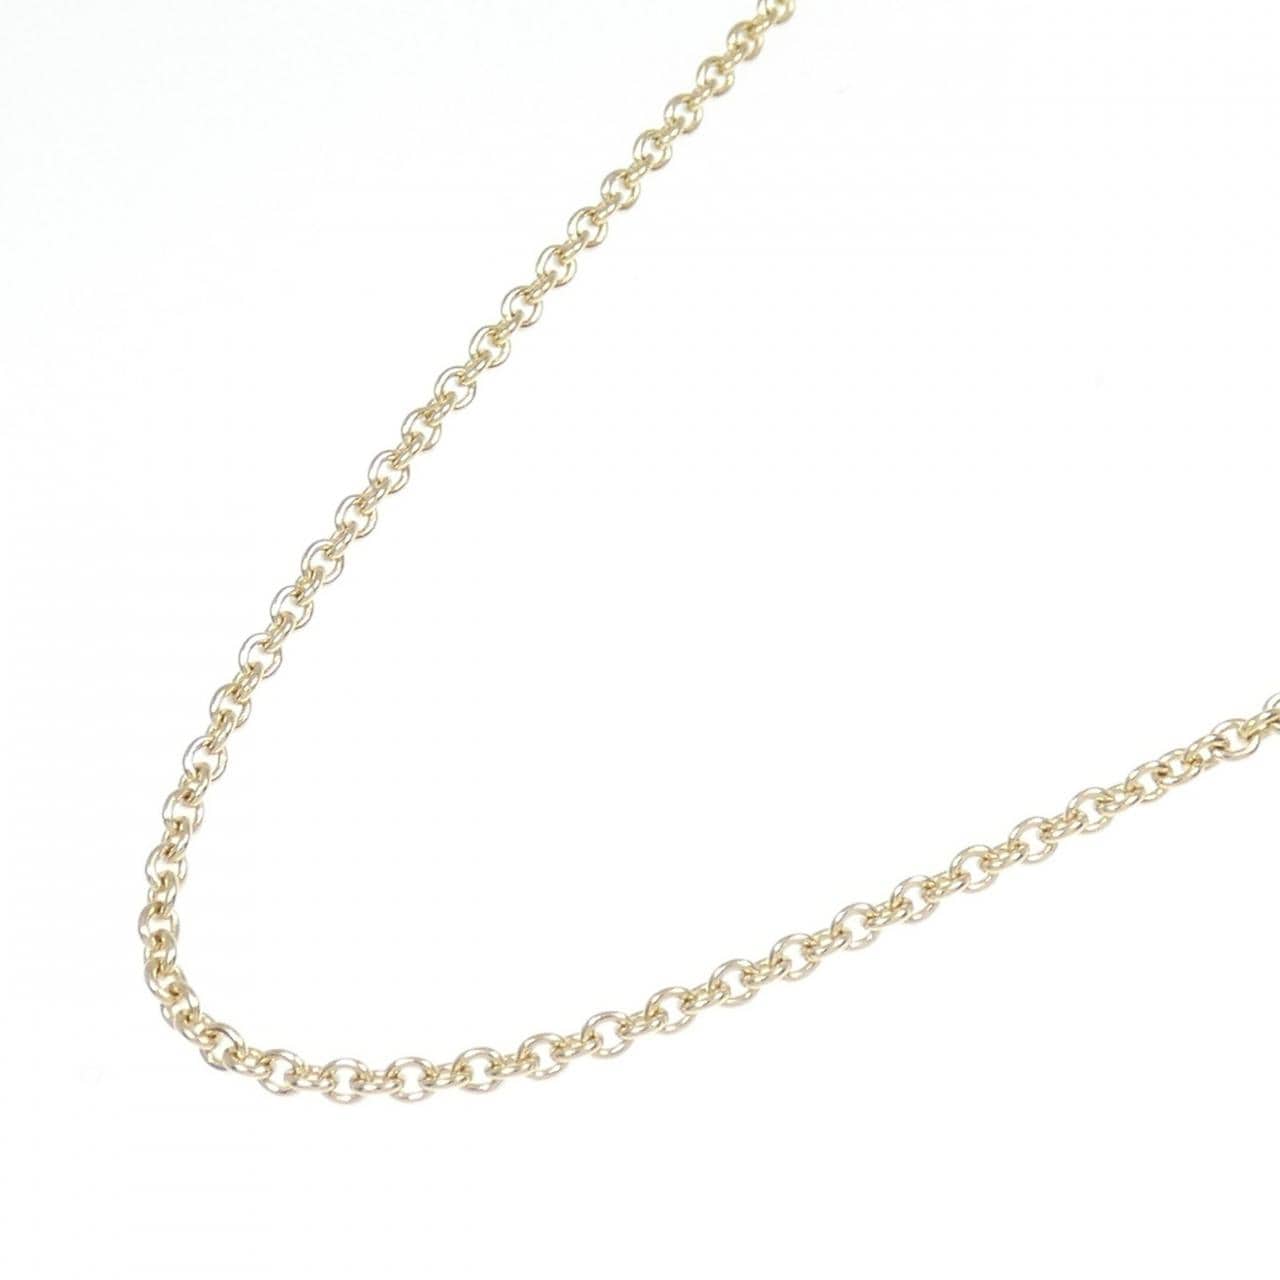 Cartier Forsa chain necklace